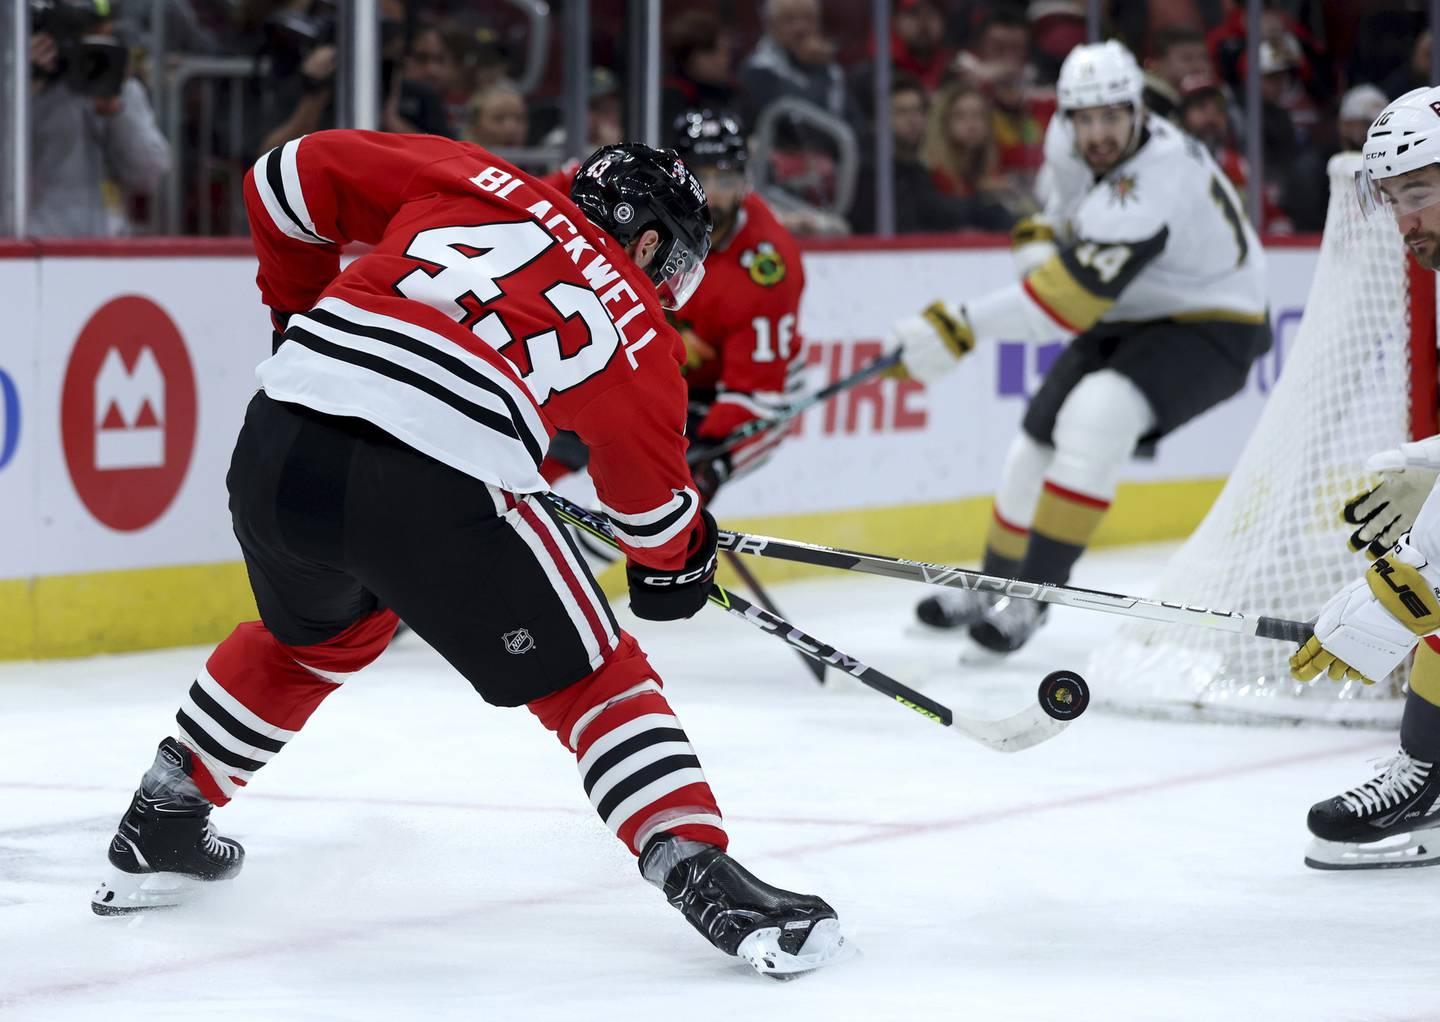 Blackhawks center Colin Blackwell tries to gain control of the puck in the first period against the Golden Knights at the United Center on Dec. 15, 2022.